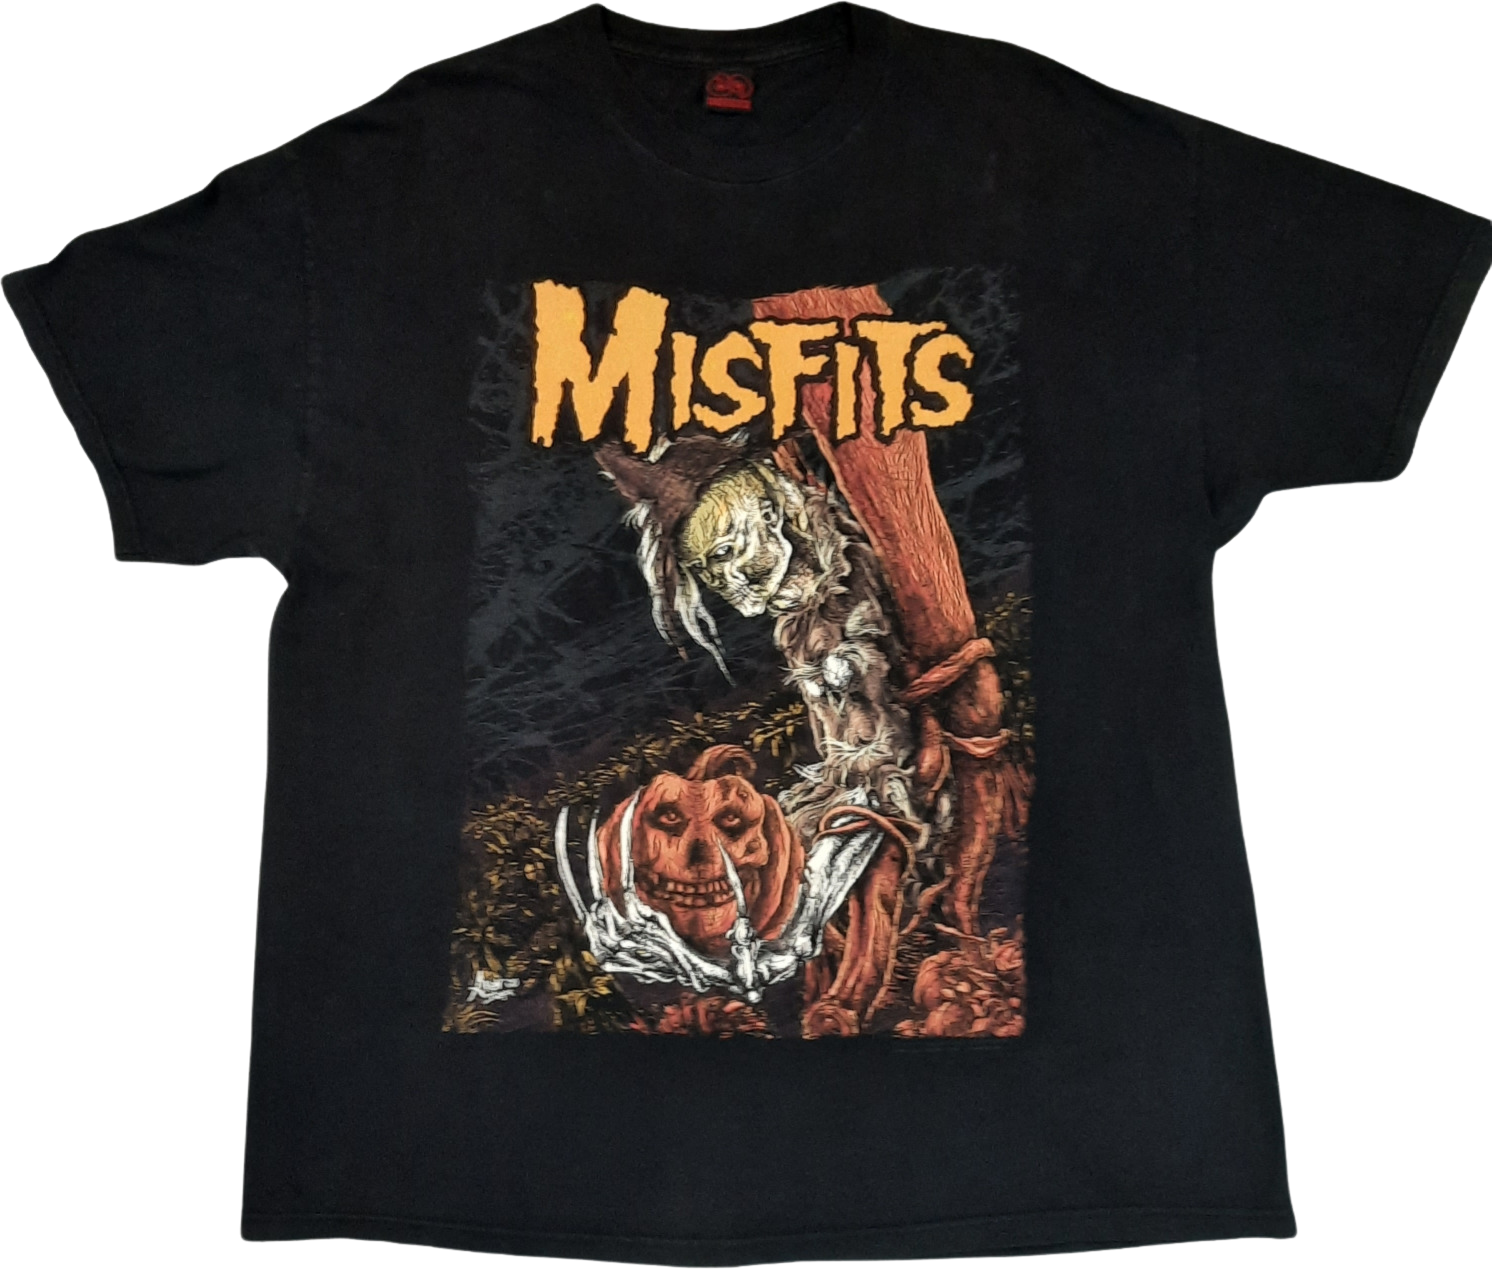 90s/00s Misfits I'm The Scarecrow Man T-shirt By Cinder Block